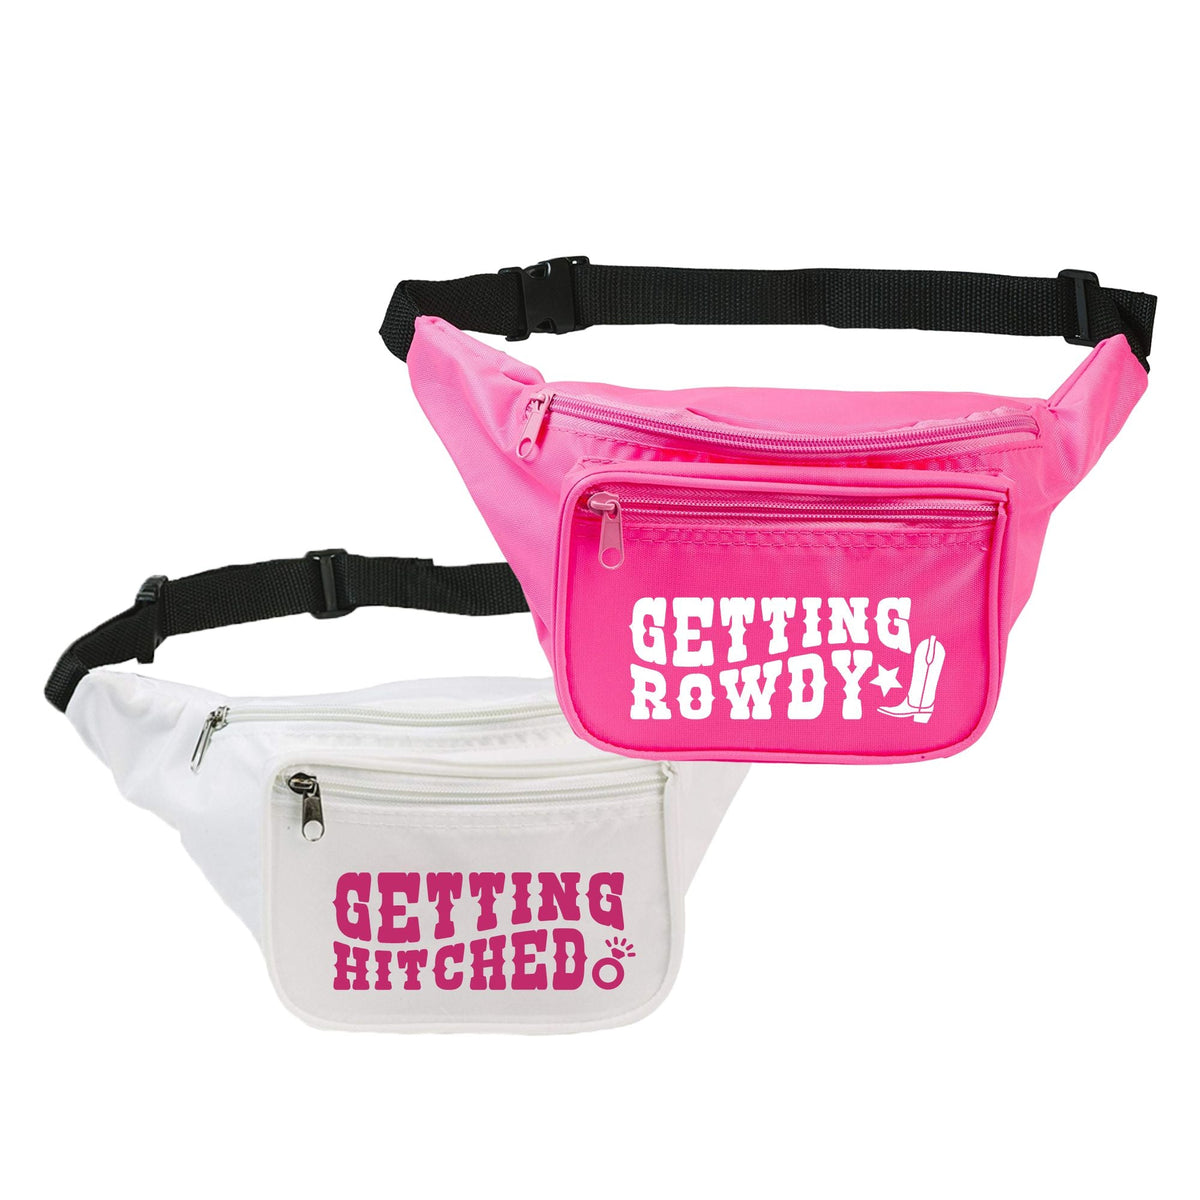 Monogrammed Fanny Pack - Sprinkled With Pink